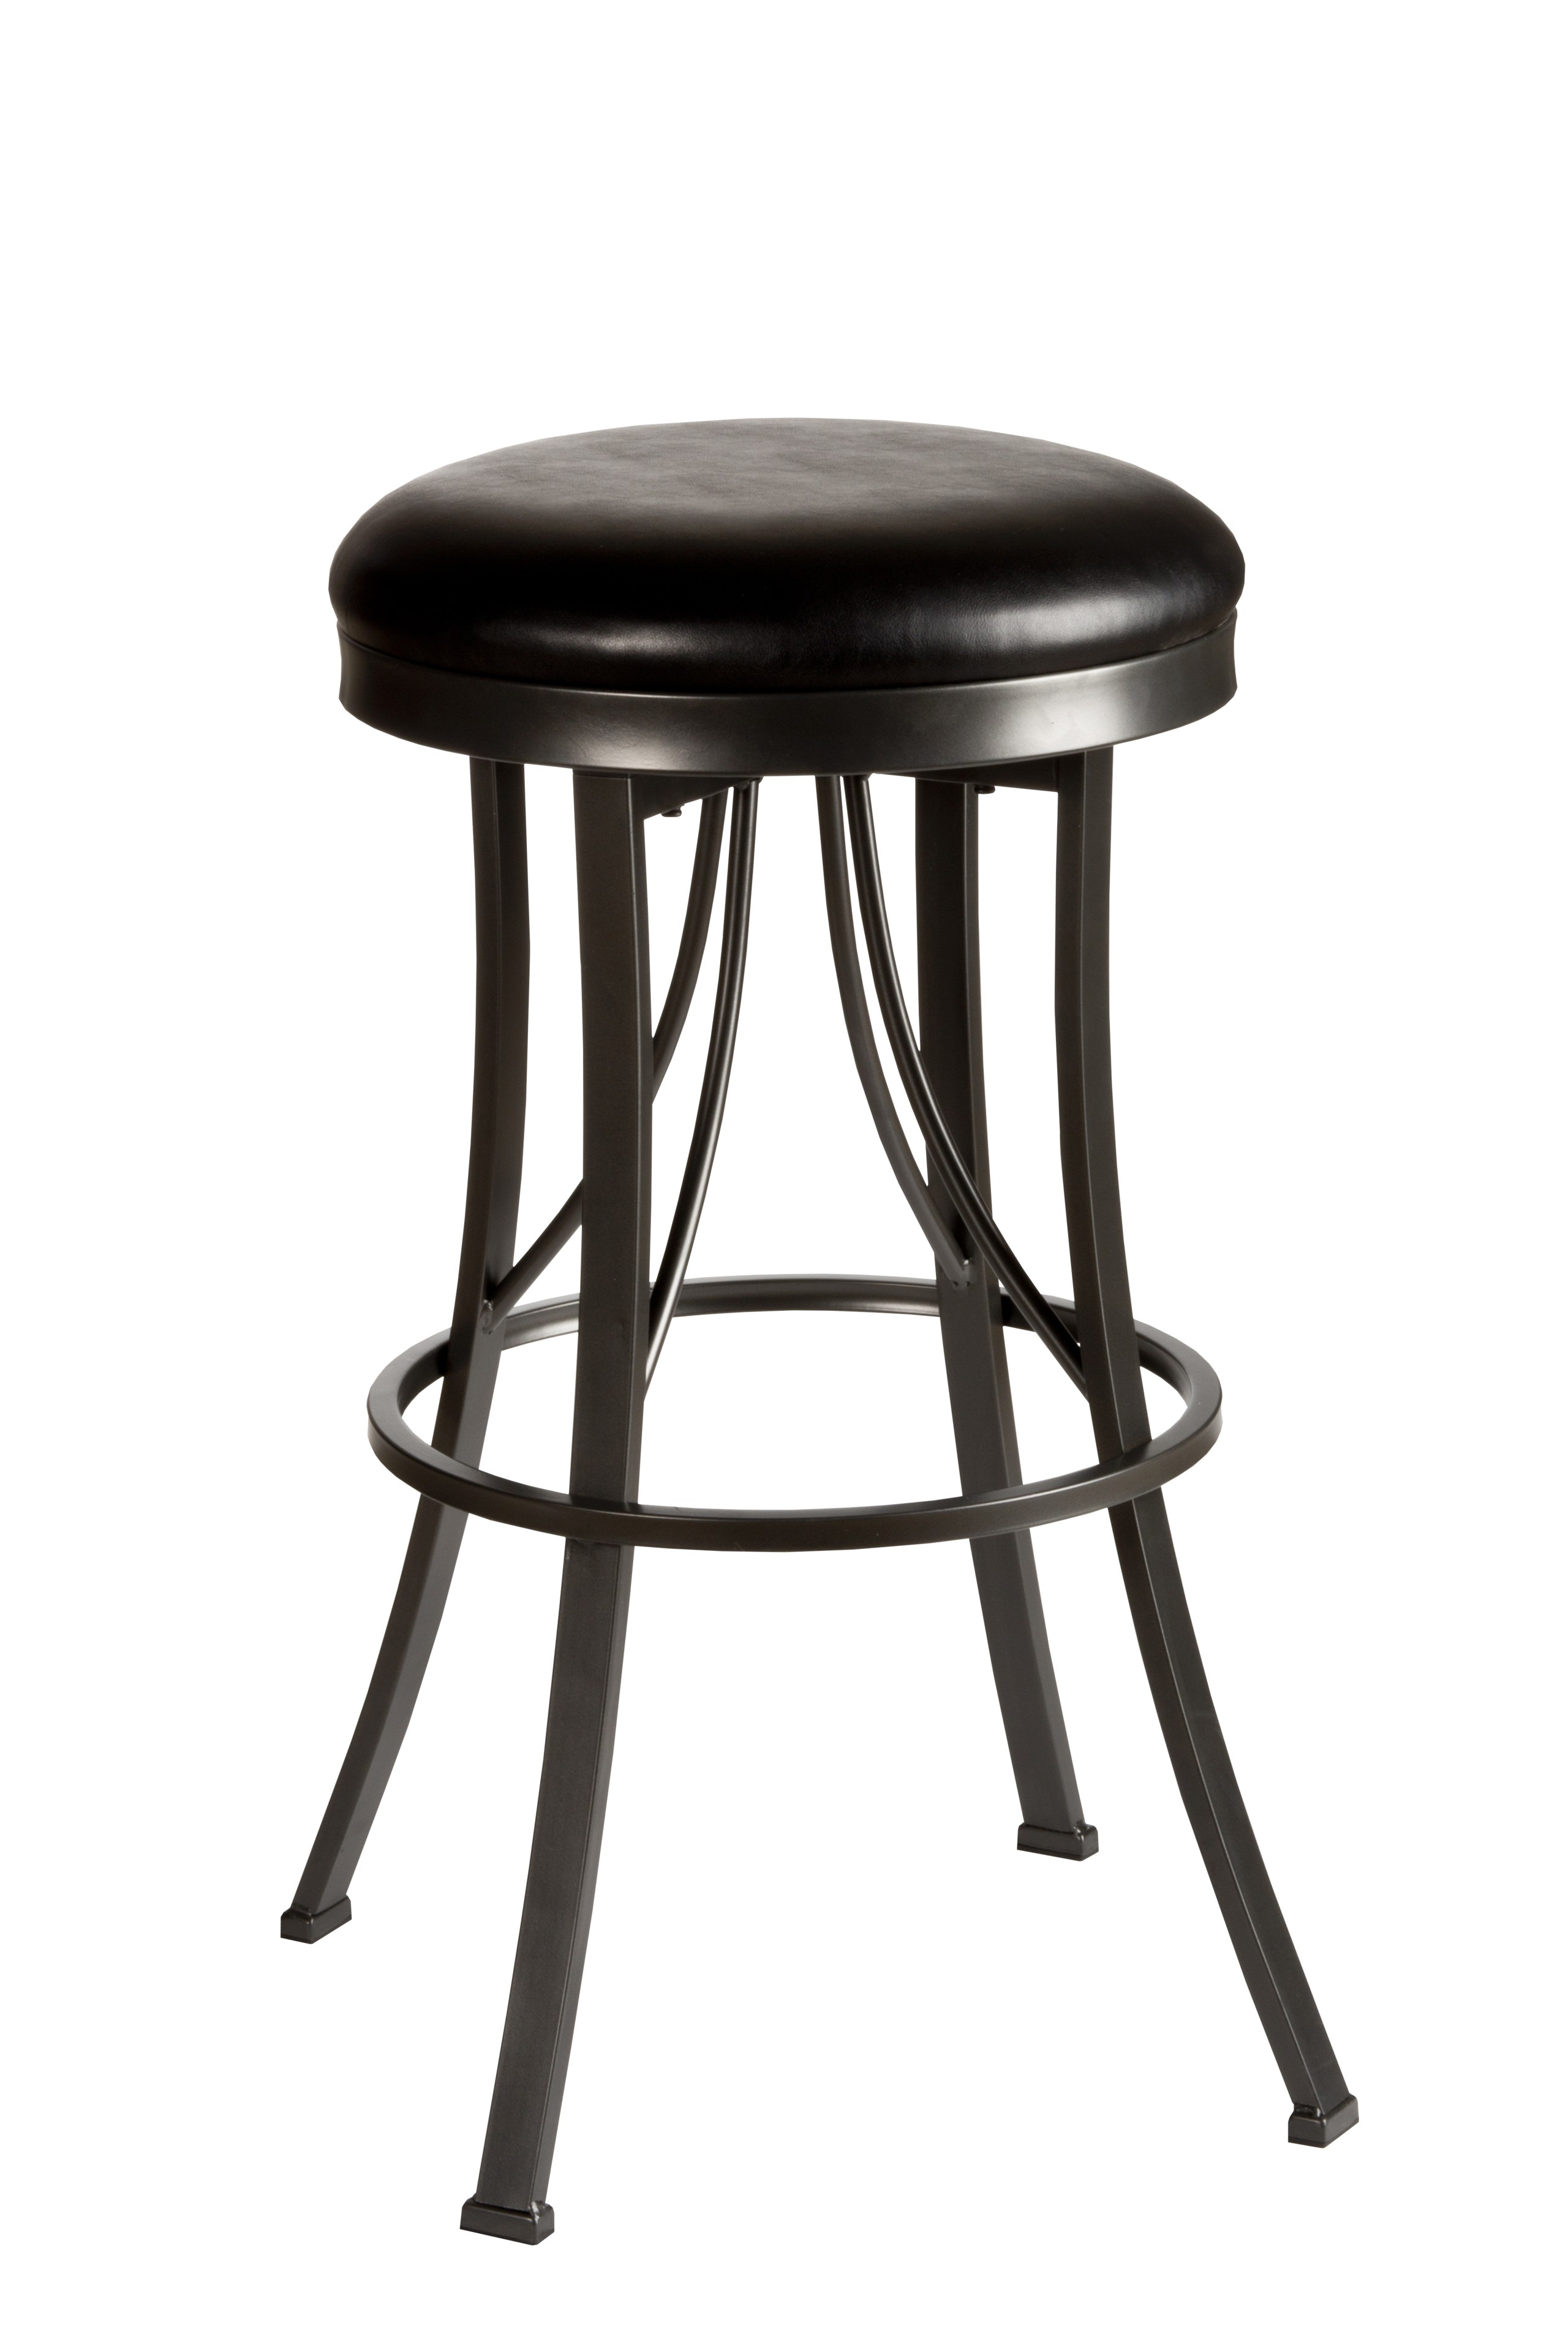 Hillsdale Furniture Hillsdale Ontario Backless Commercial Counter Stool Black Metal 